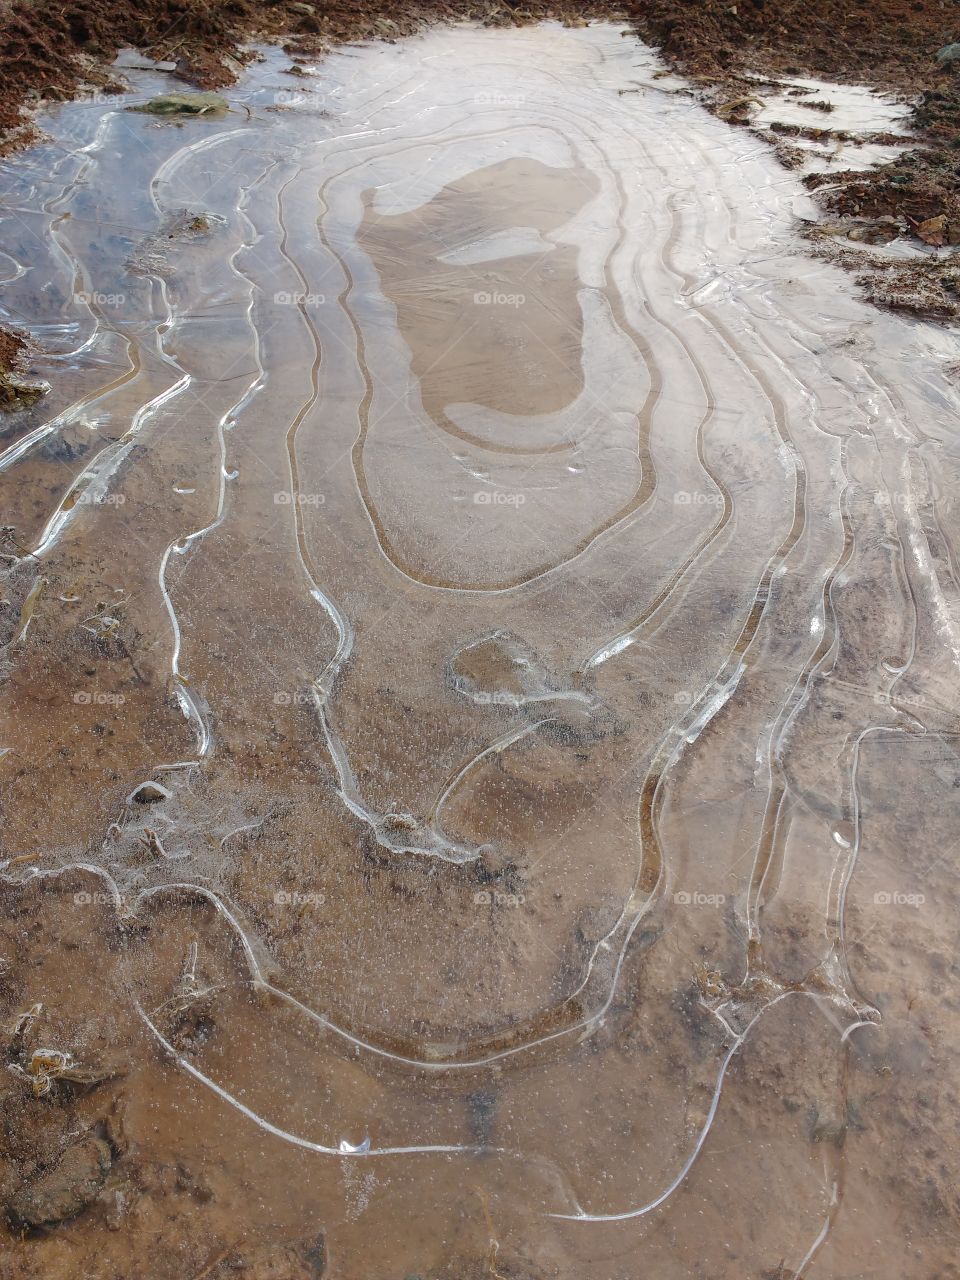 layers of ice on a mud puddle